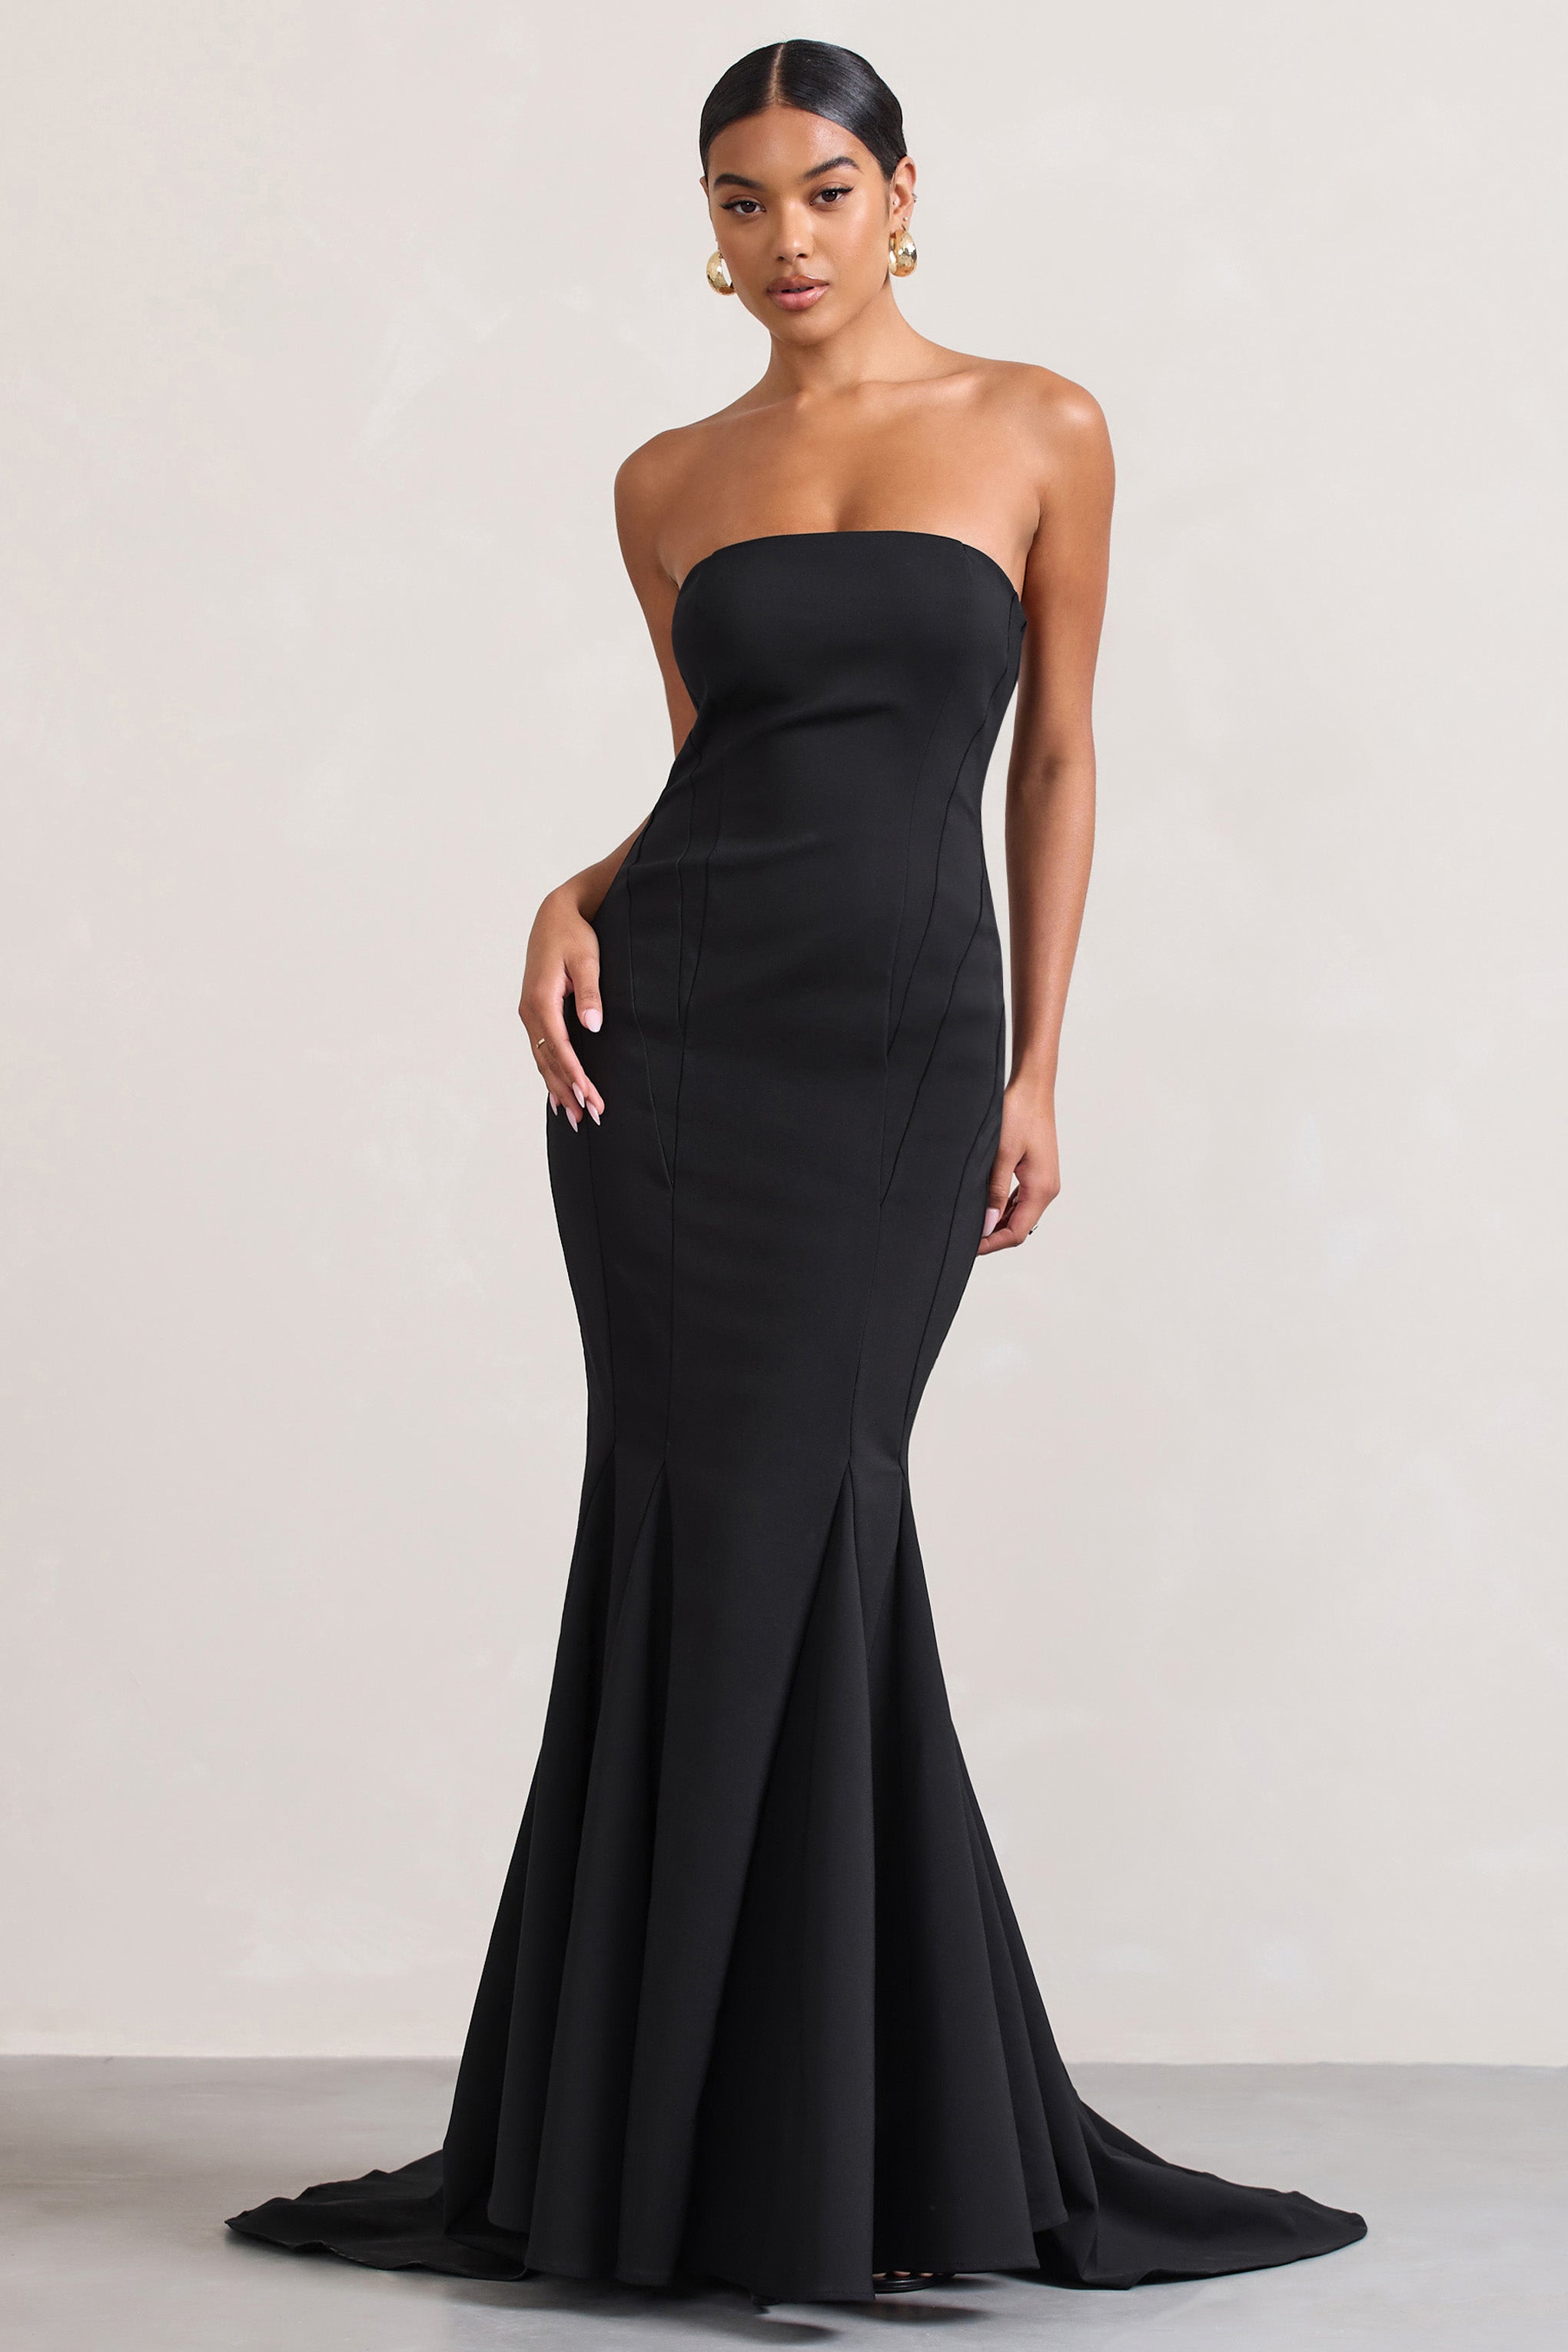 Adored Black Strapless Structured Fishtail Maxi Dress